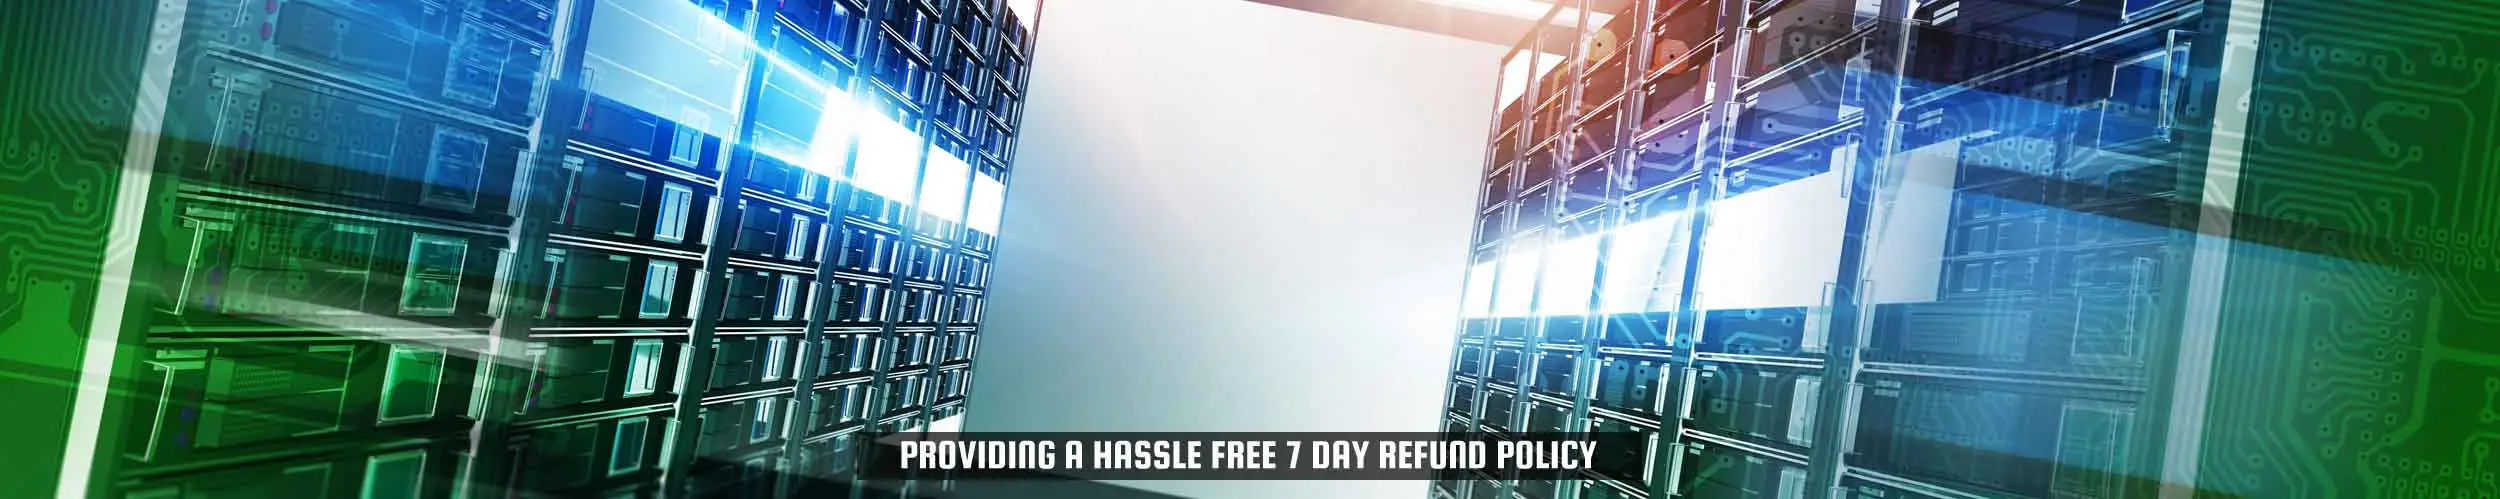 The 52 Degrees 7 Day Refund Policy | "Providing a hassle-free 7 day refund policy" | Telecom Solutions in Norwich